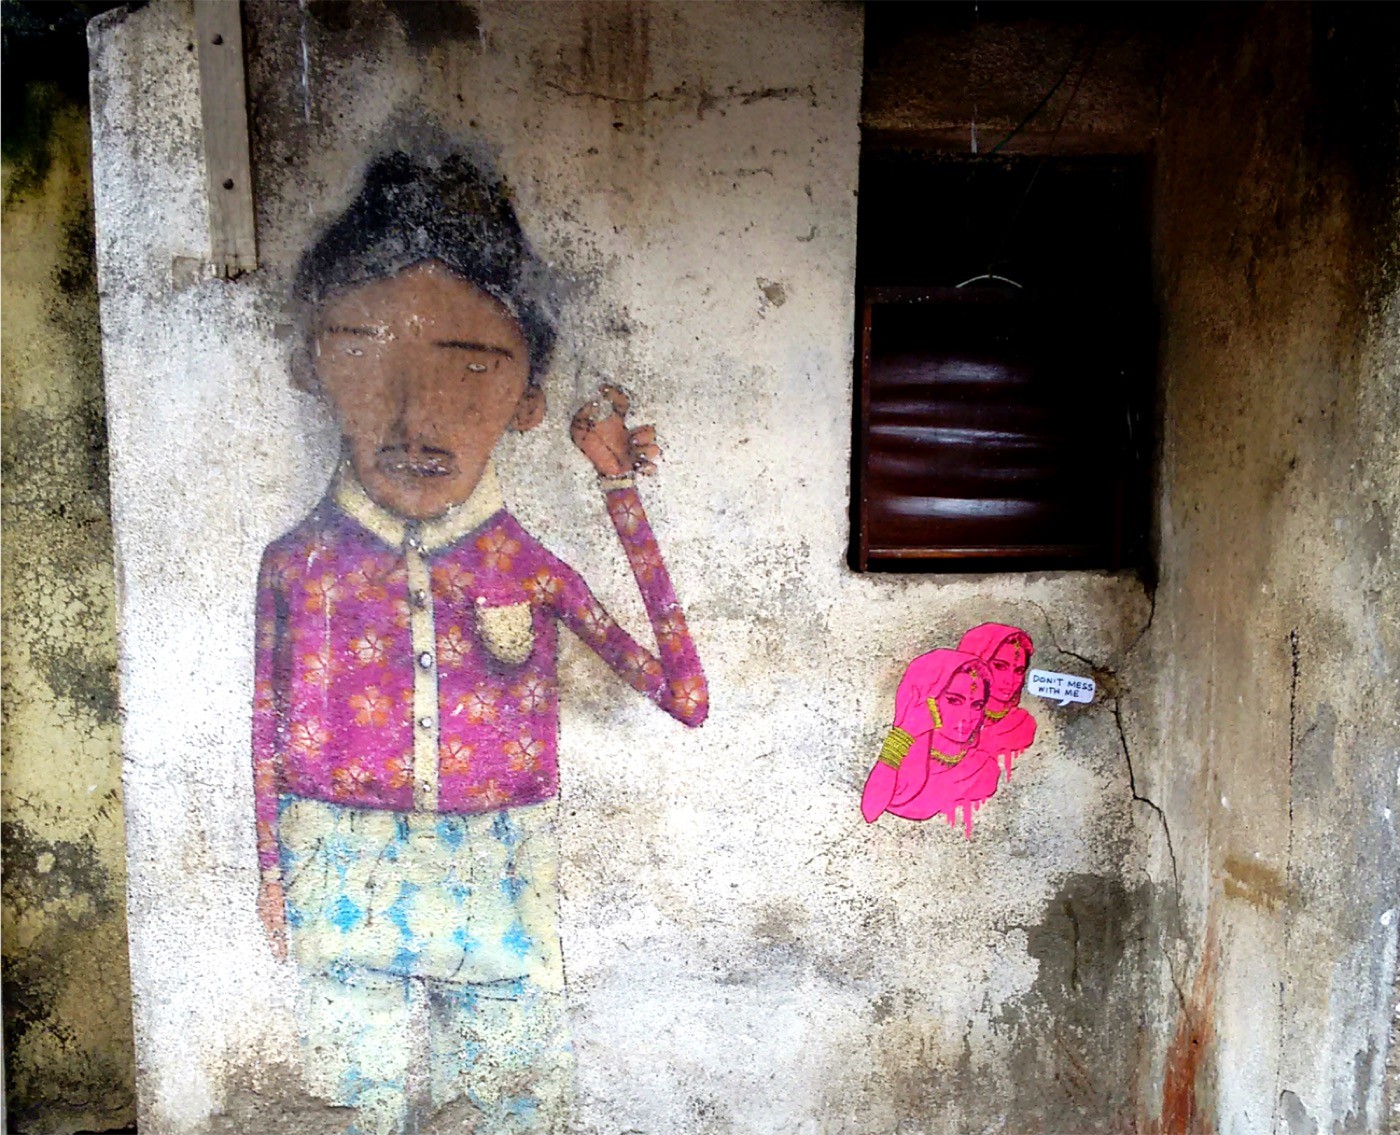 JAS_IMAGE 3_OS GEMEOS WITH DOUBLE PINK LADY SMALL